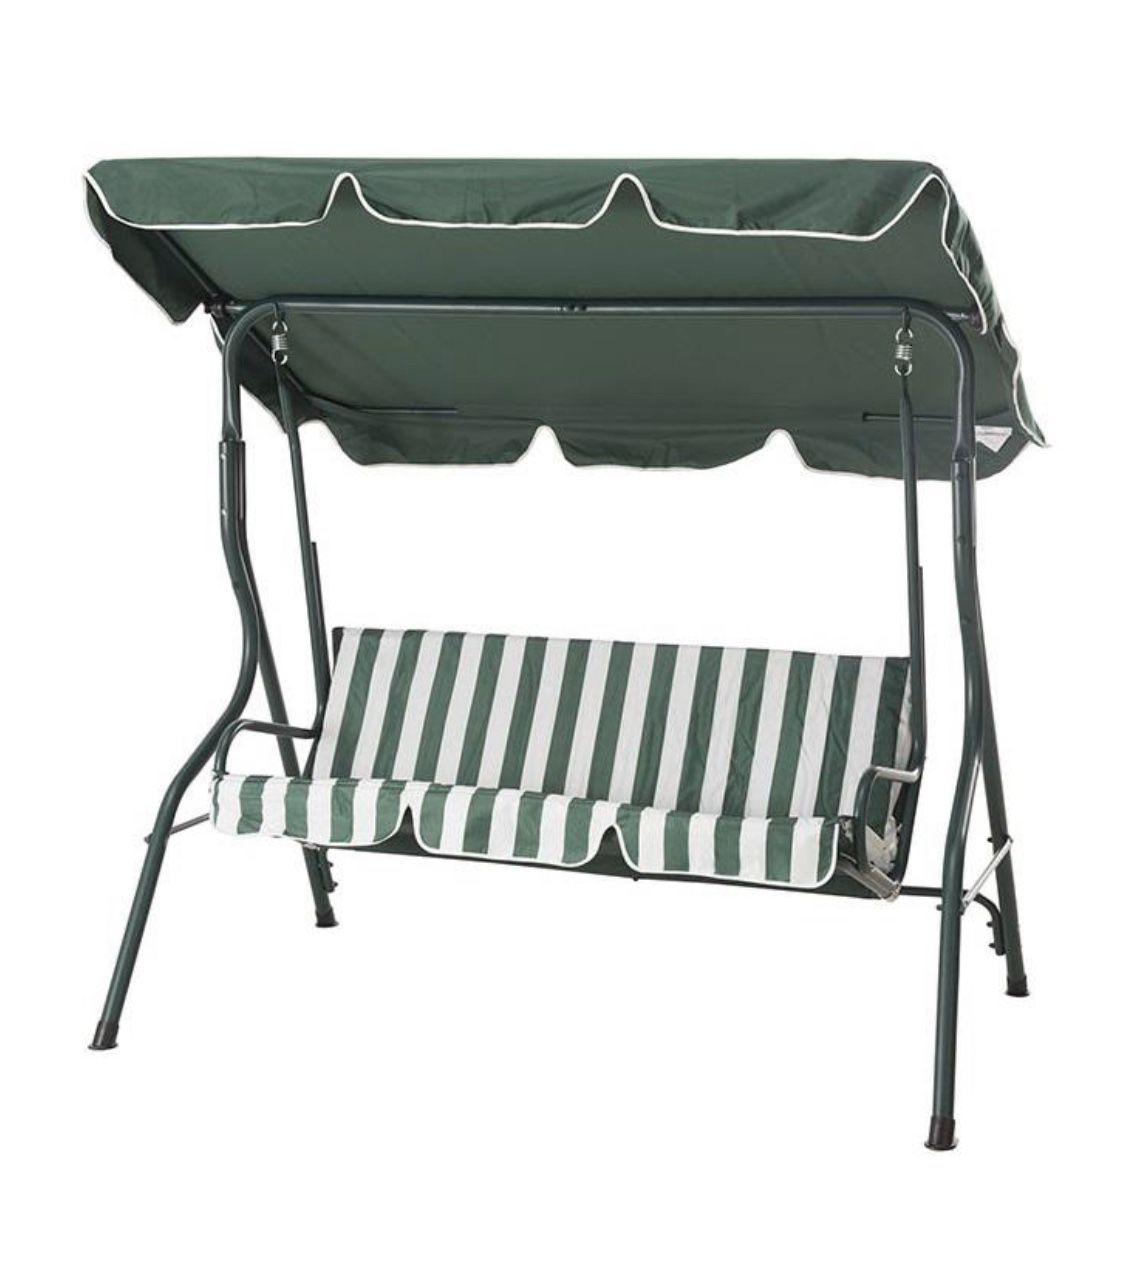 Sunjoy Greenland 3-Person Green Metal Porch Swing with Green Canopy